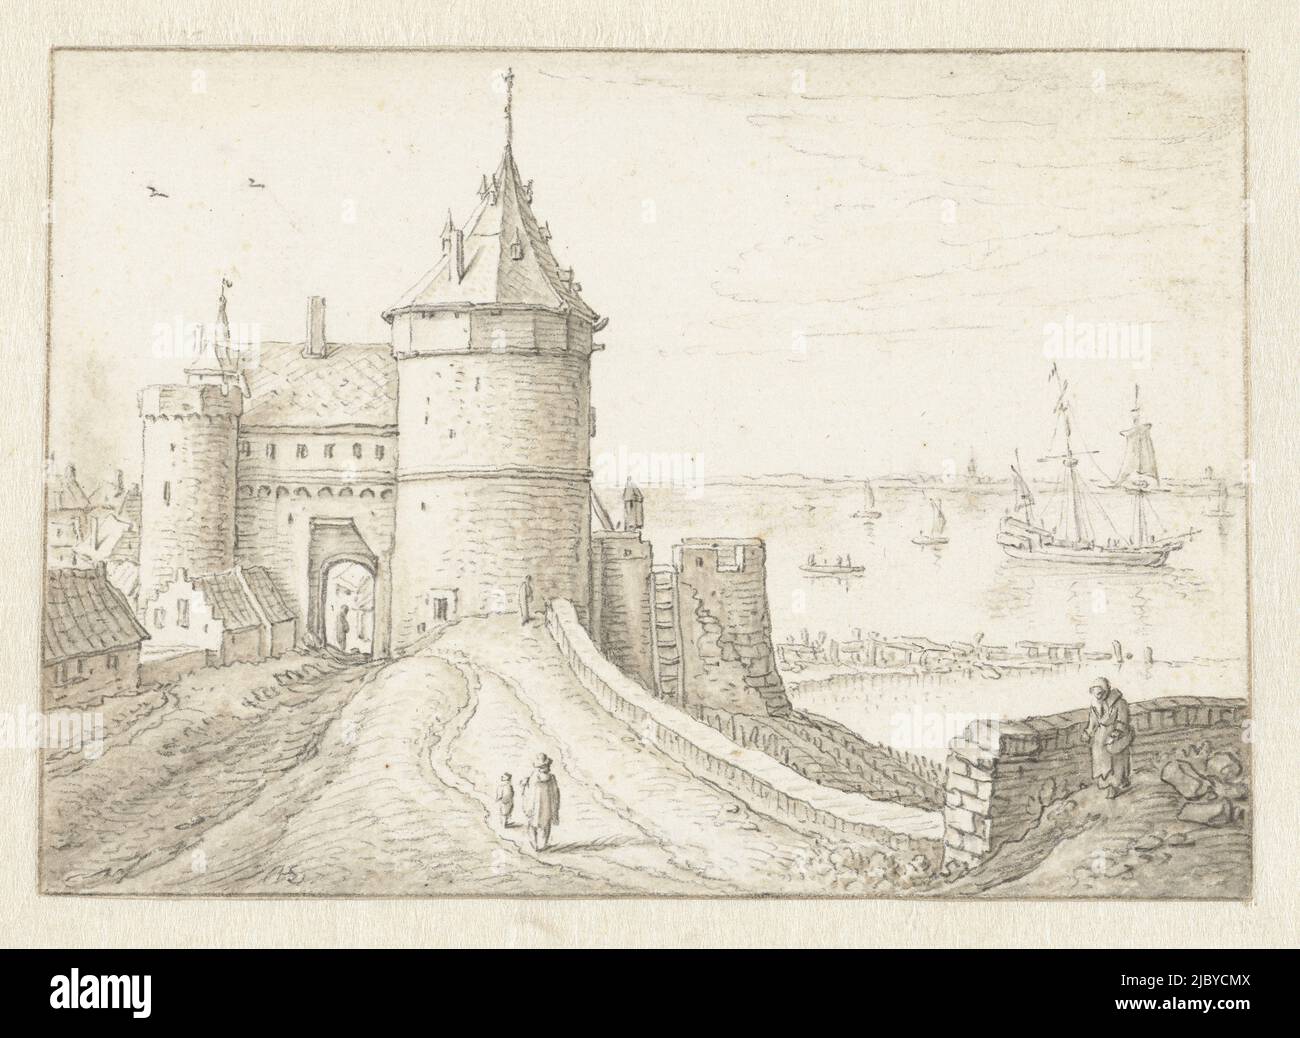 City gate with a view of the sea, Herman Saftleven, 1619 - 1685, draughtsman: Herman Saftleven, 1619 - 1685, paper, brush, h 107 mm × w 154 mm Stock Photo